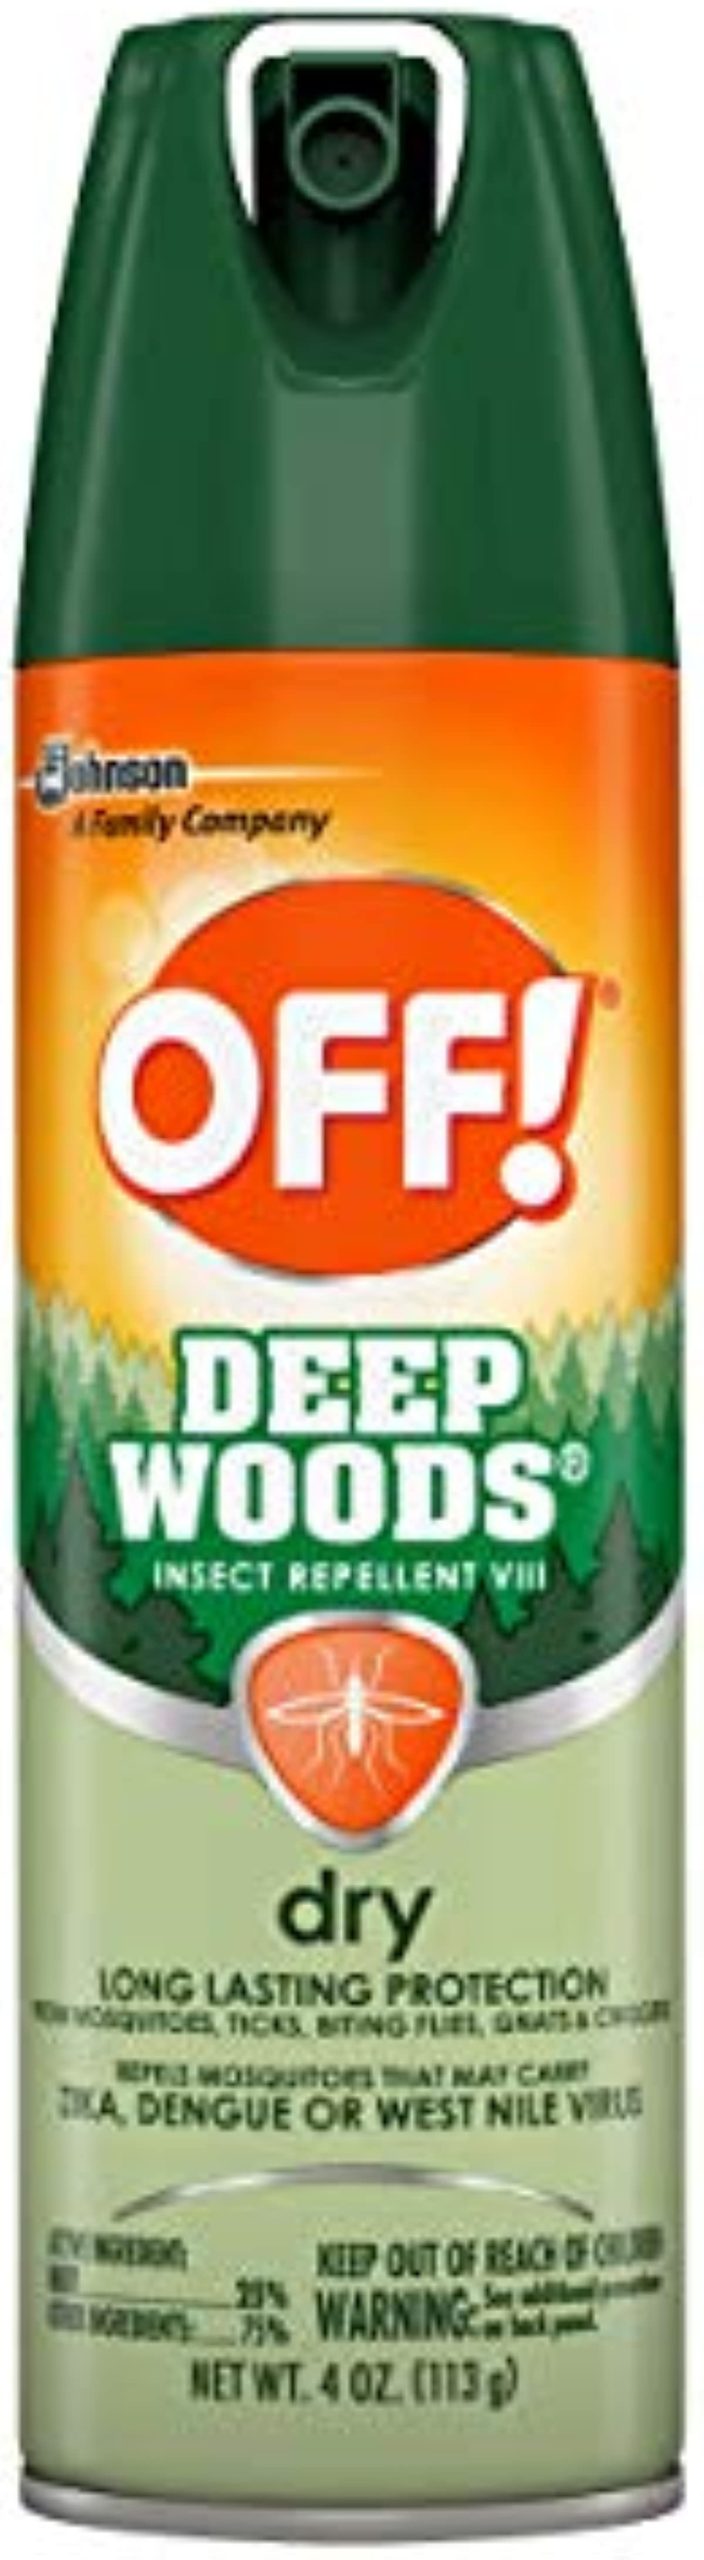 OFF! Deep Woods Insect Repellent Aerosol, Dry, Non-Greasy Formula, Bug Spray with Long Lasting Protection from Mosquitoes, 4 oz (Pack of 4)